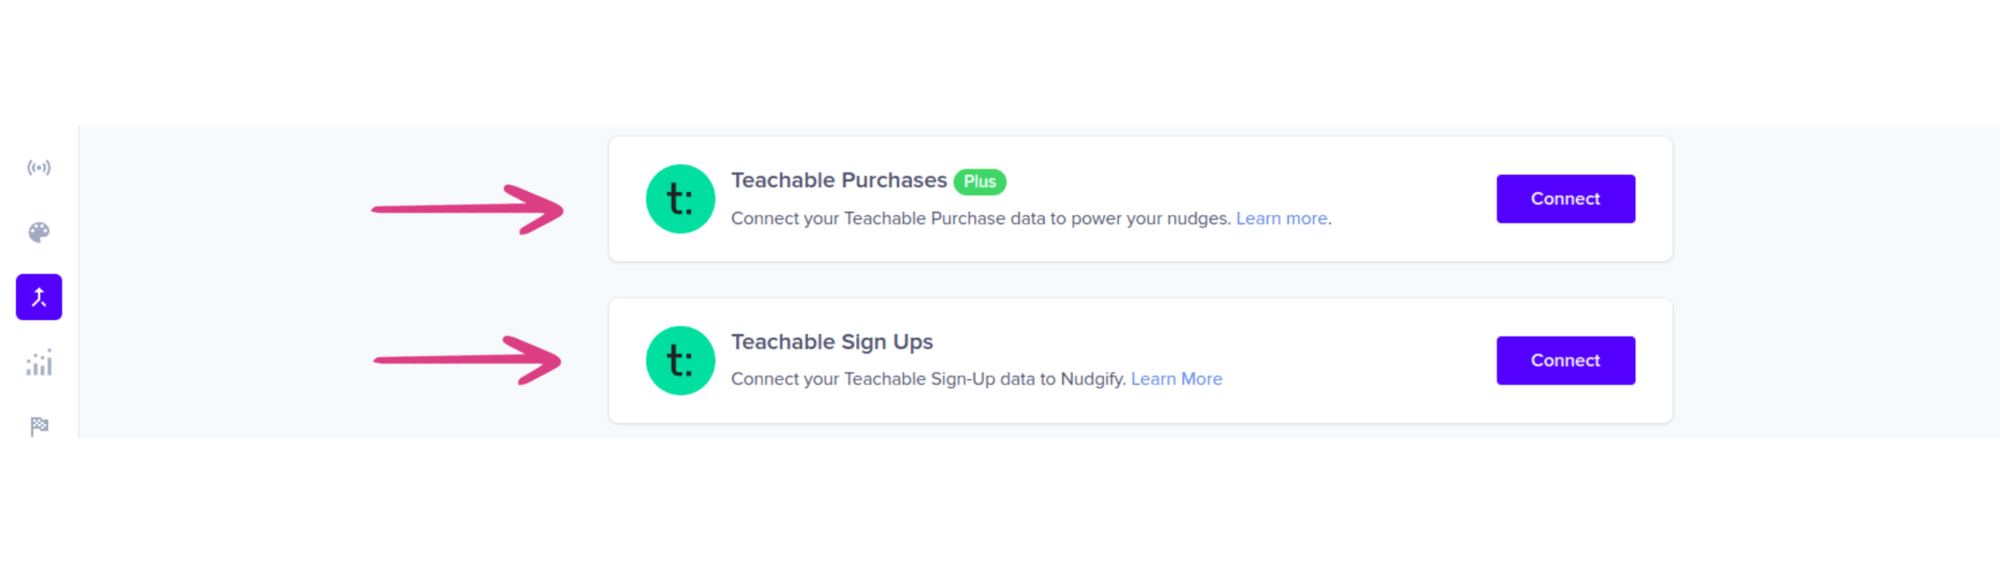 Teachable sales and signup socialnprof